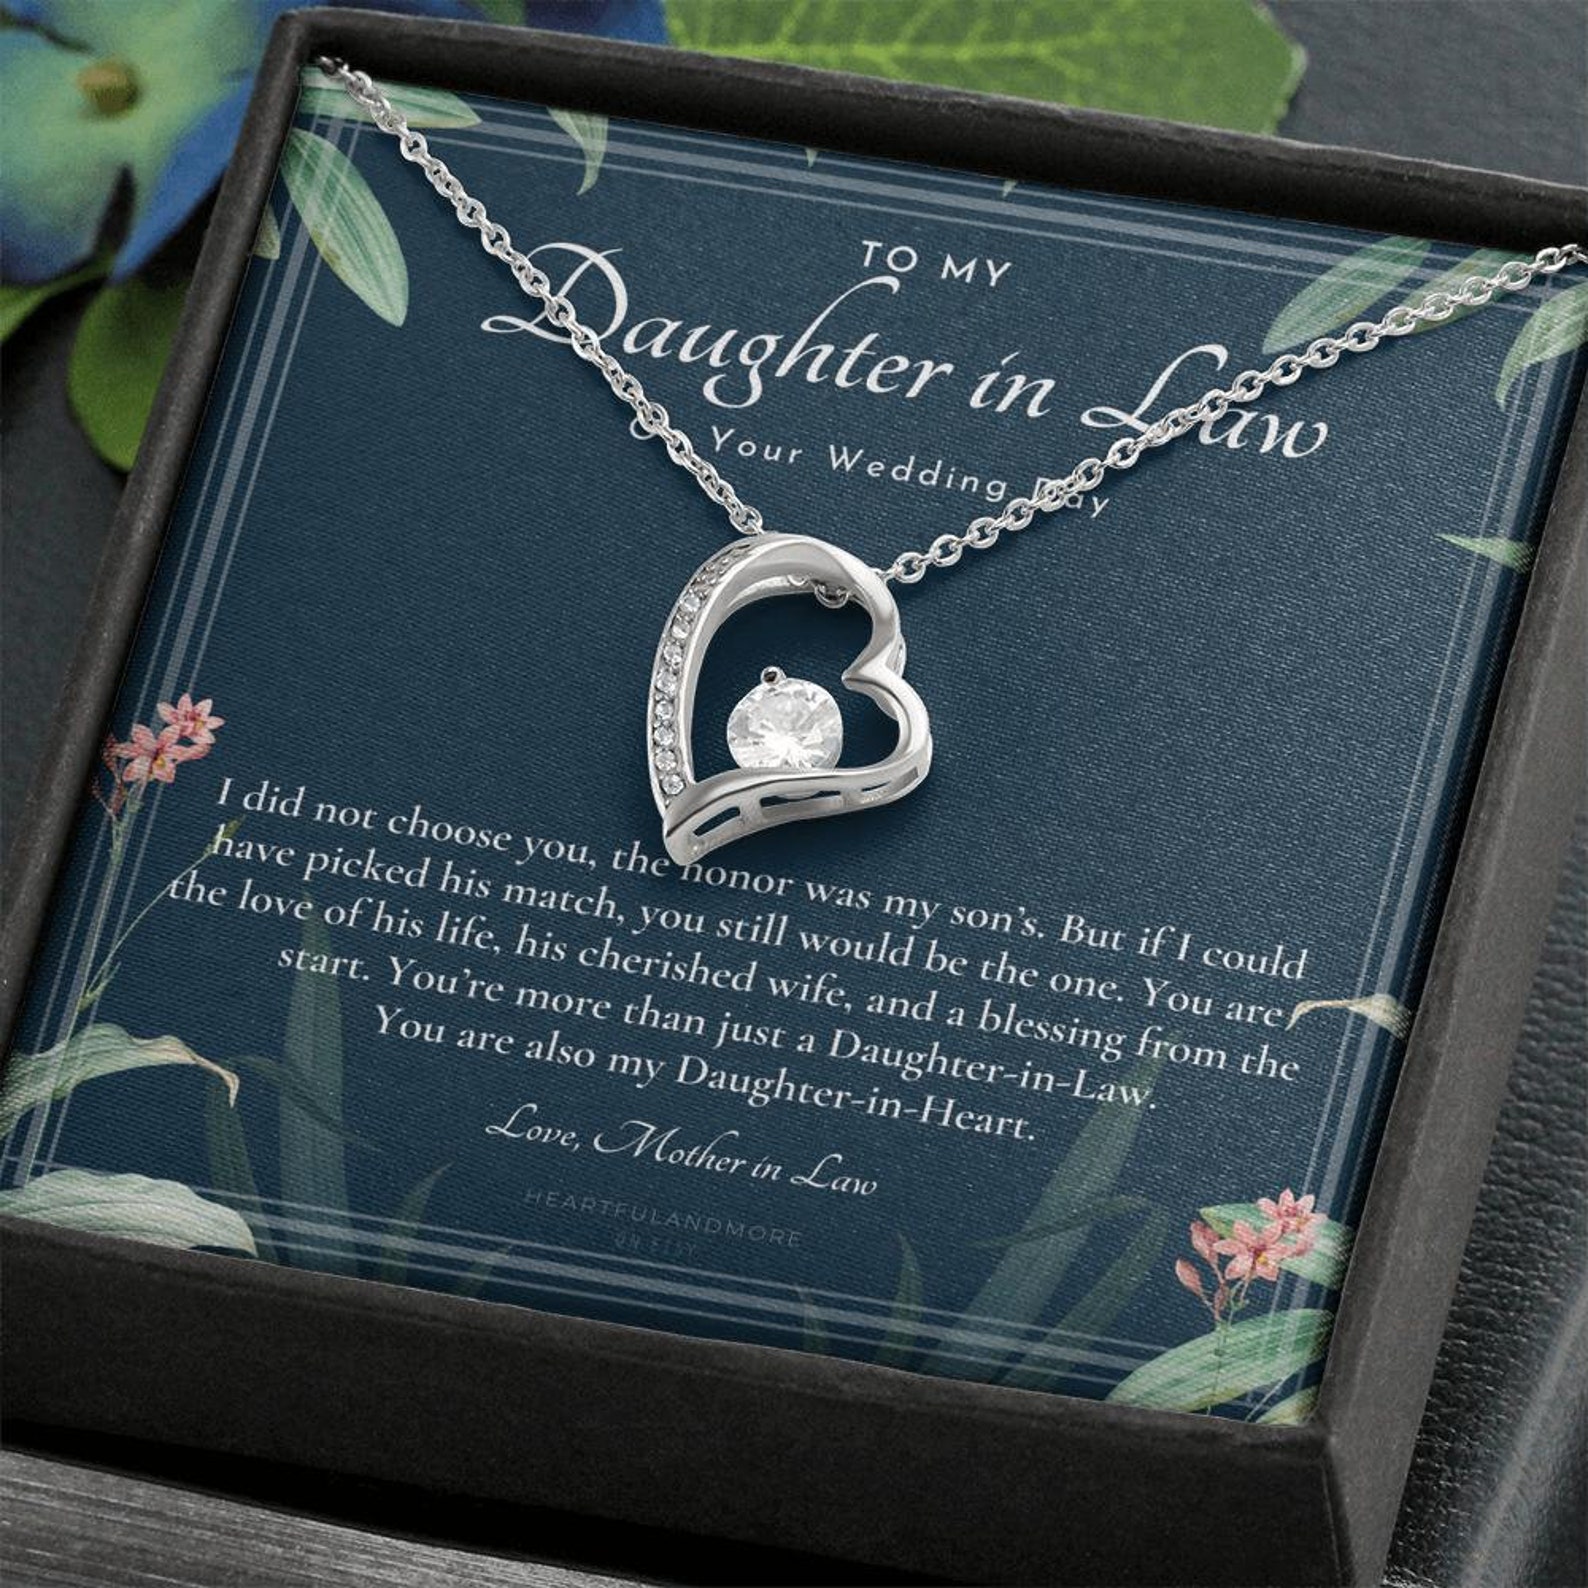 Daughter In Law T Necklace Wedding T Jewelry From Etsy